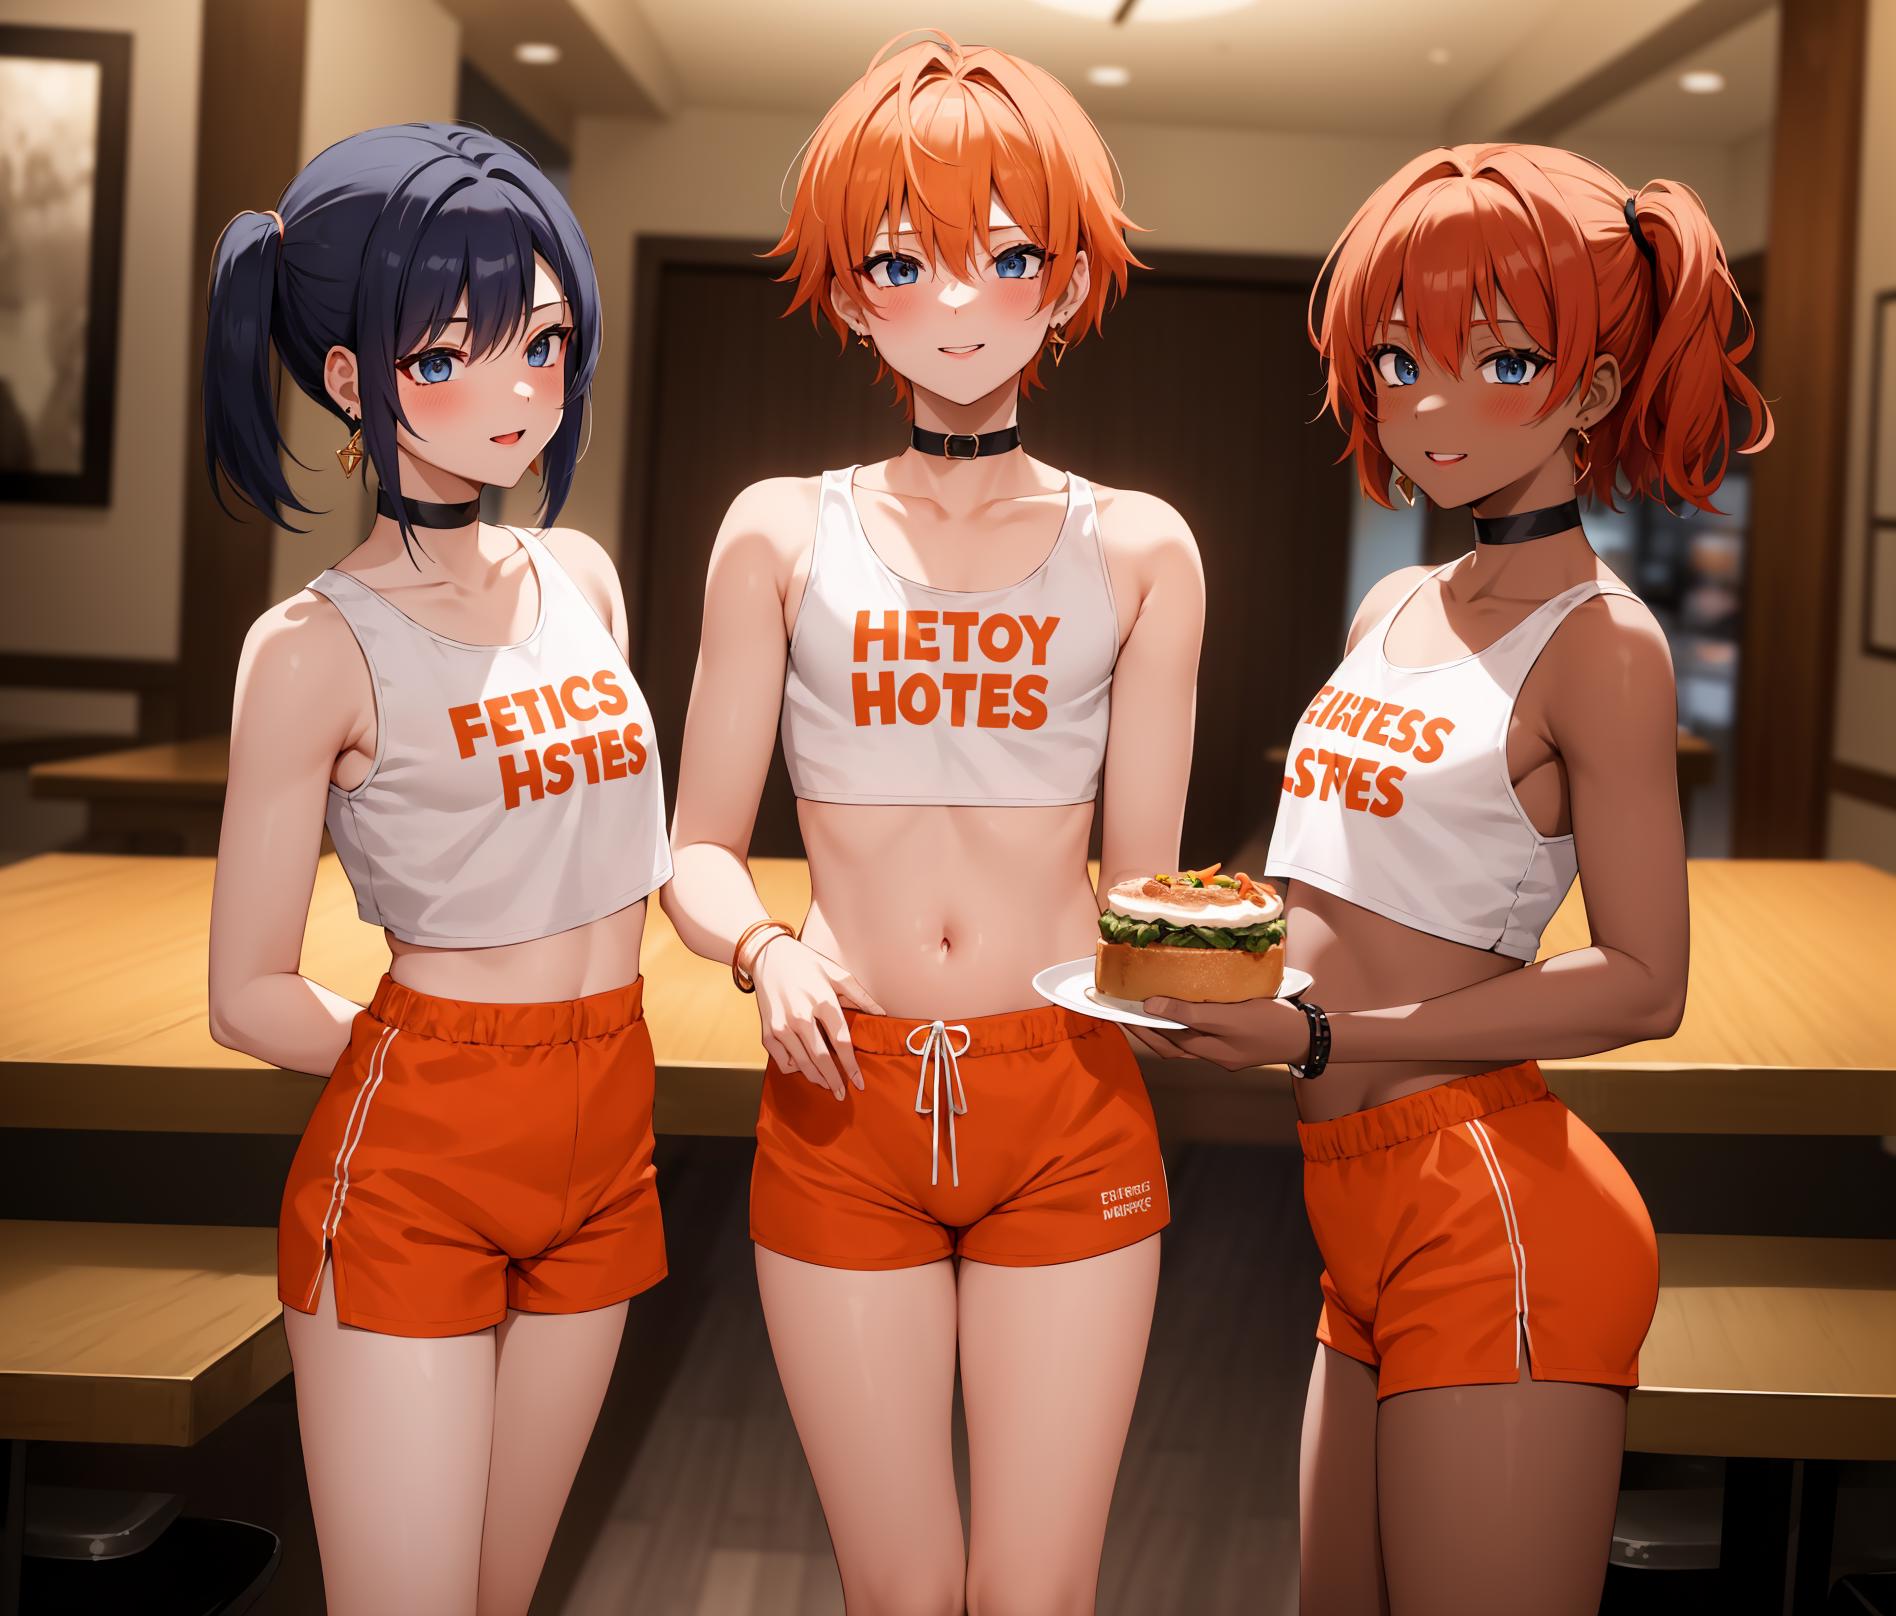 Femboy Hooters image by Nitram